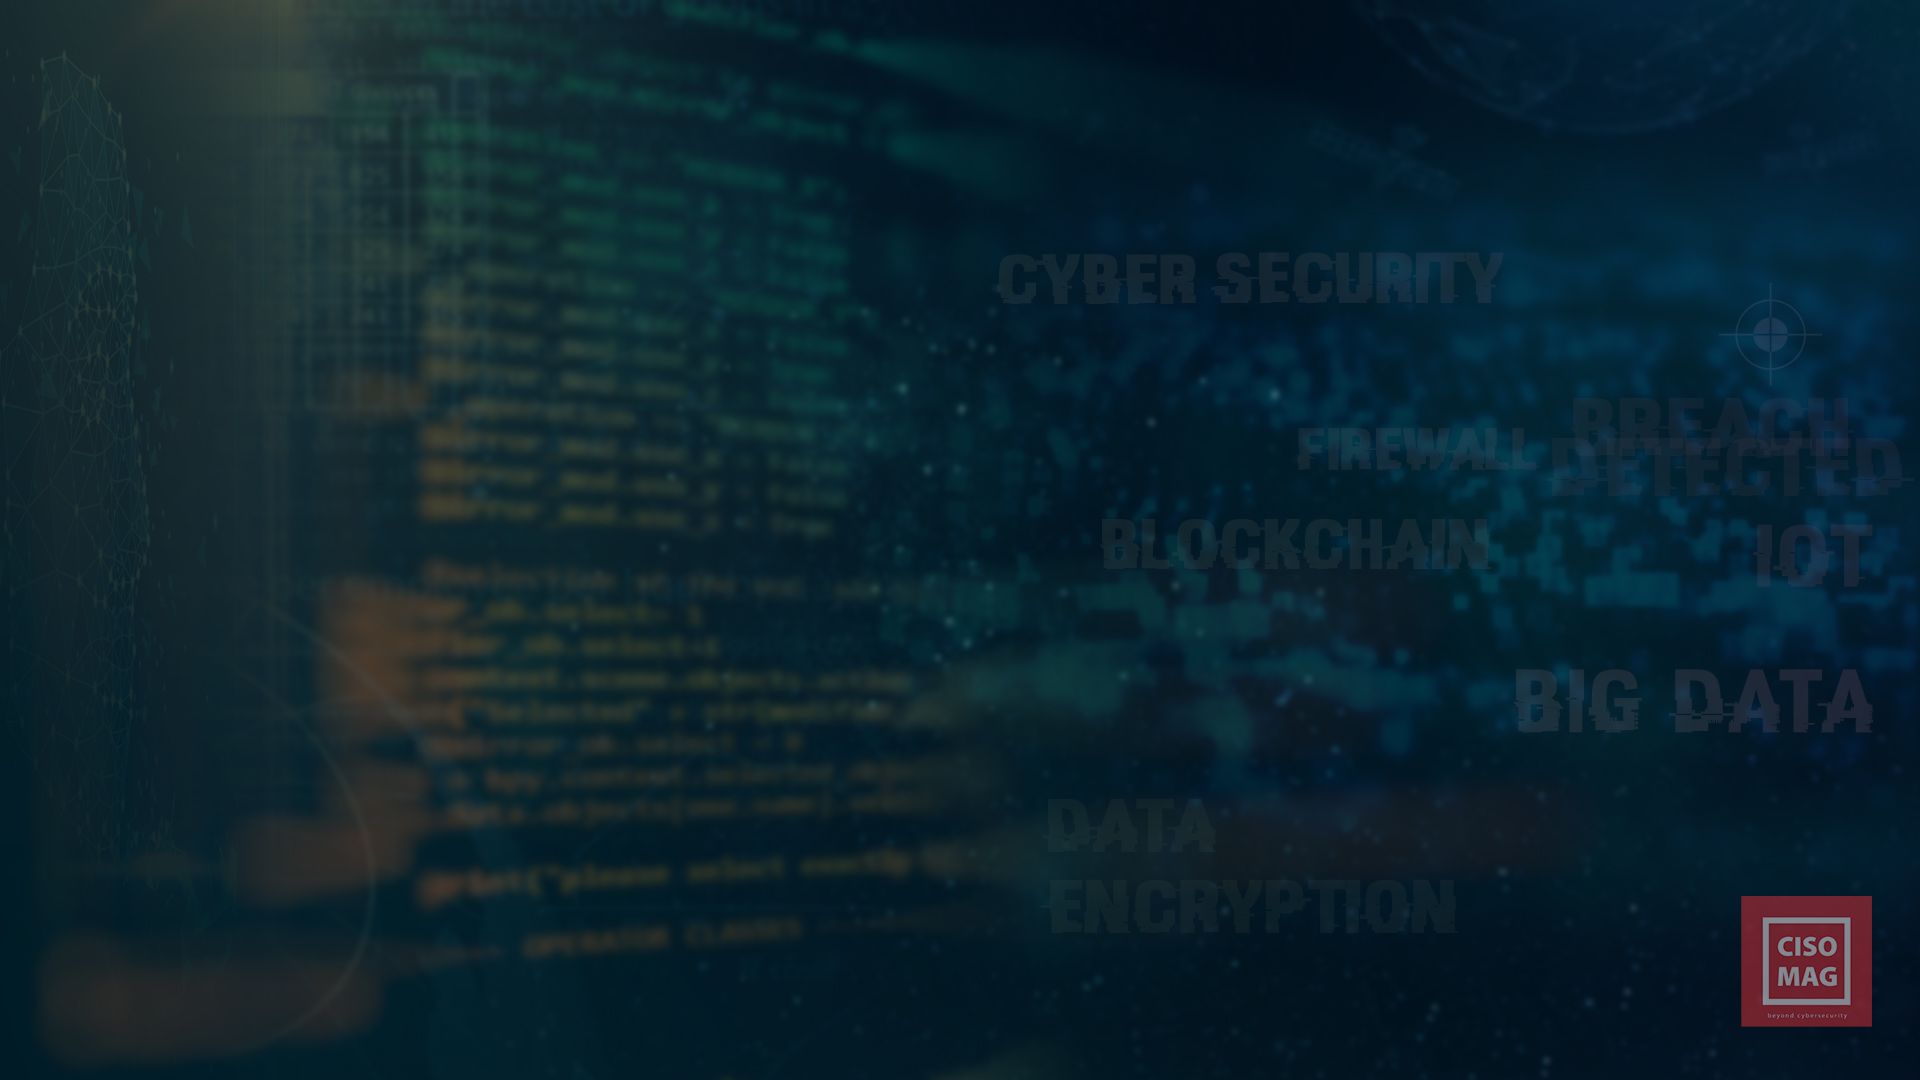 Cyber Security Wallpaper Free Cyber Security Background